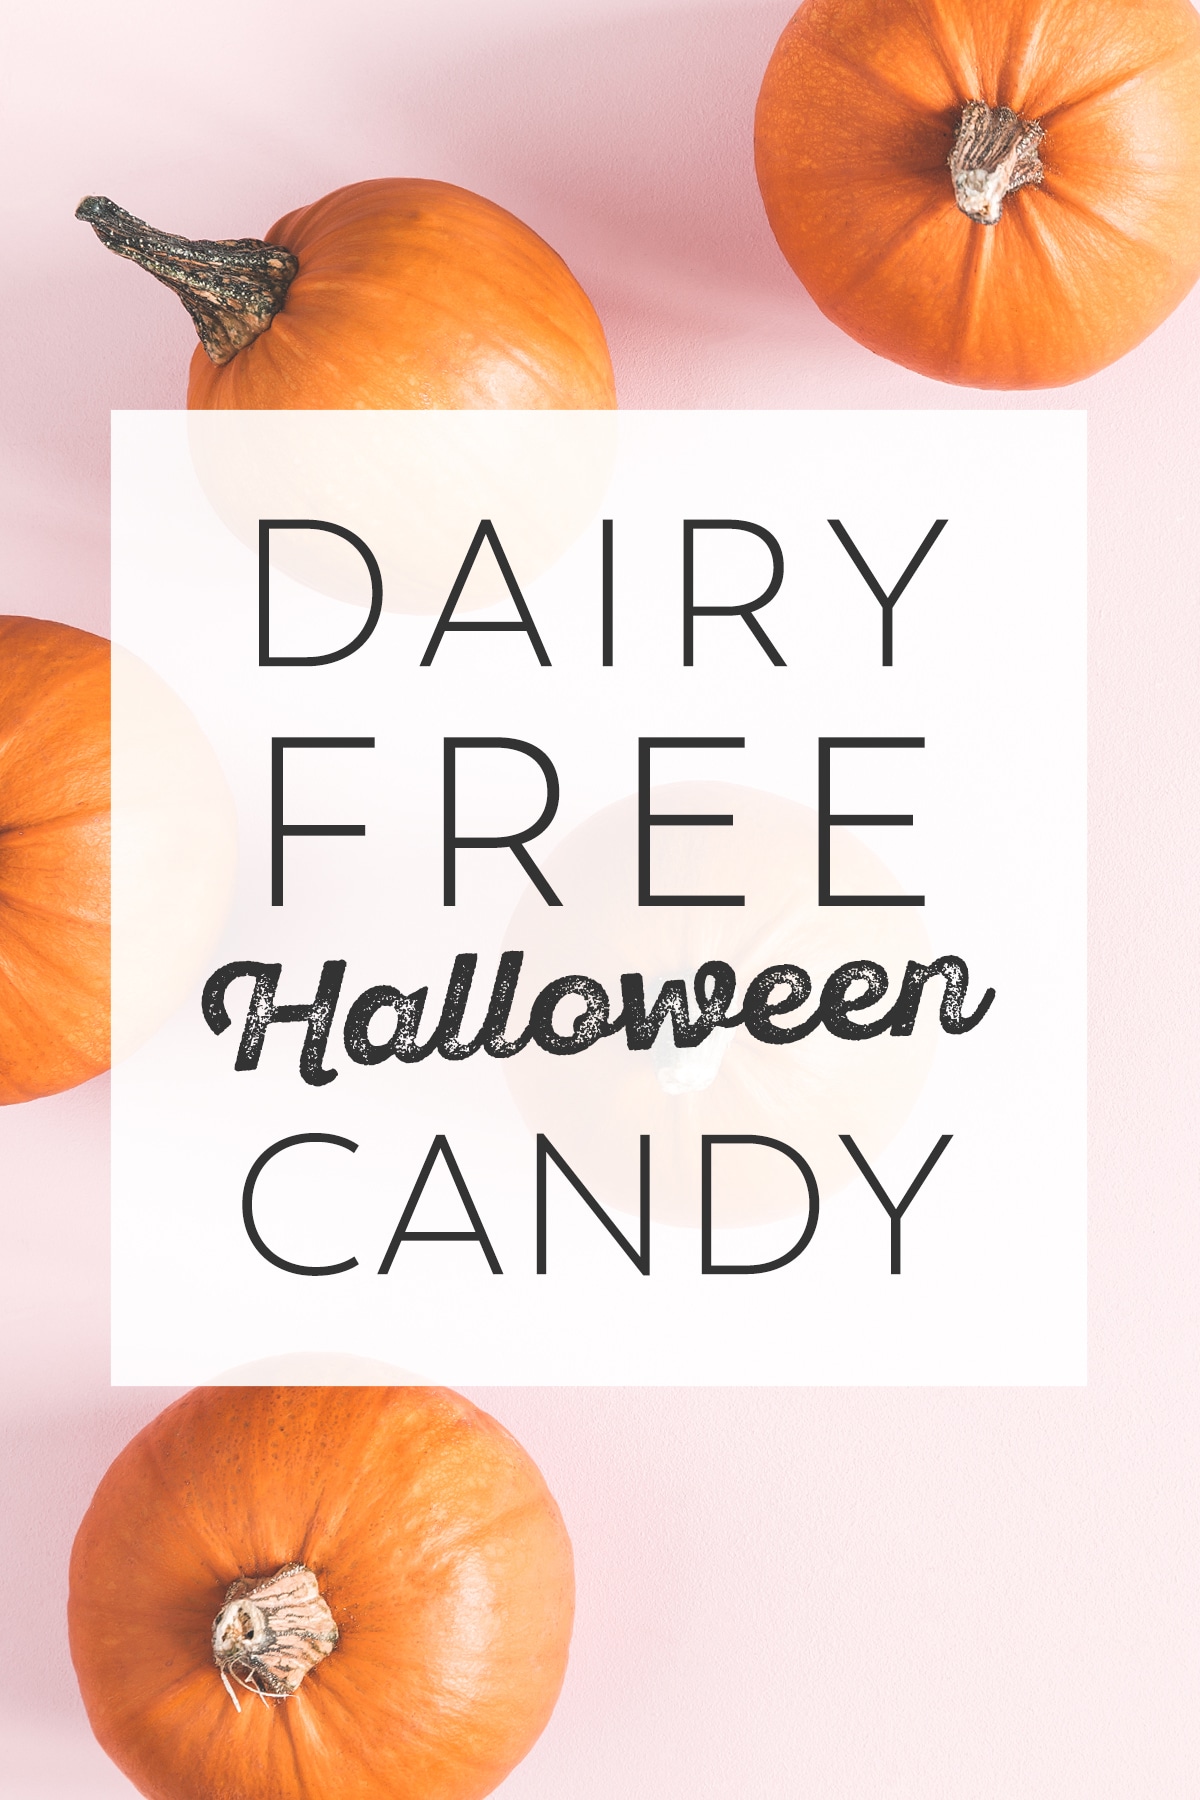 4 pumpkins on a pink background with a text overlay reading "dairy free halloween candy"